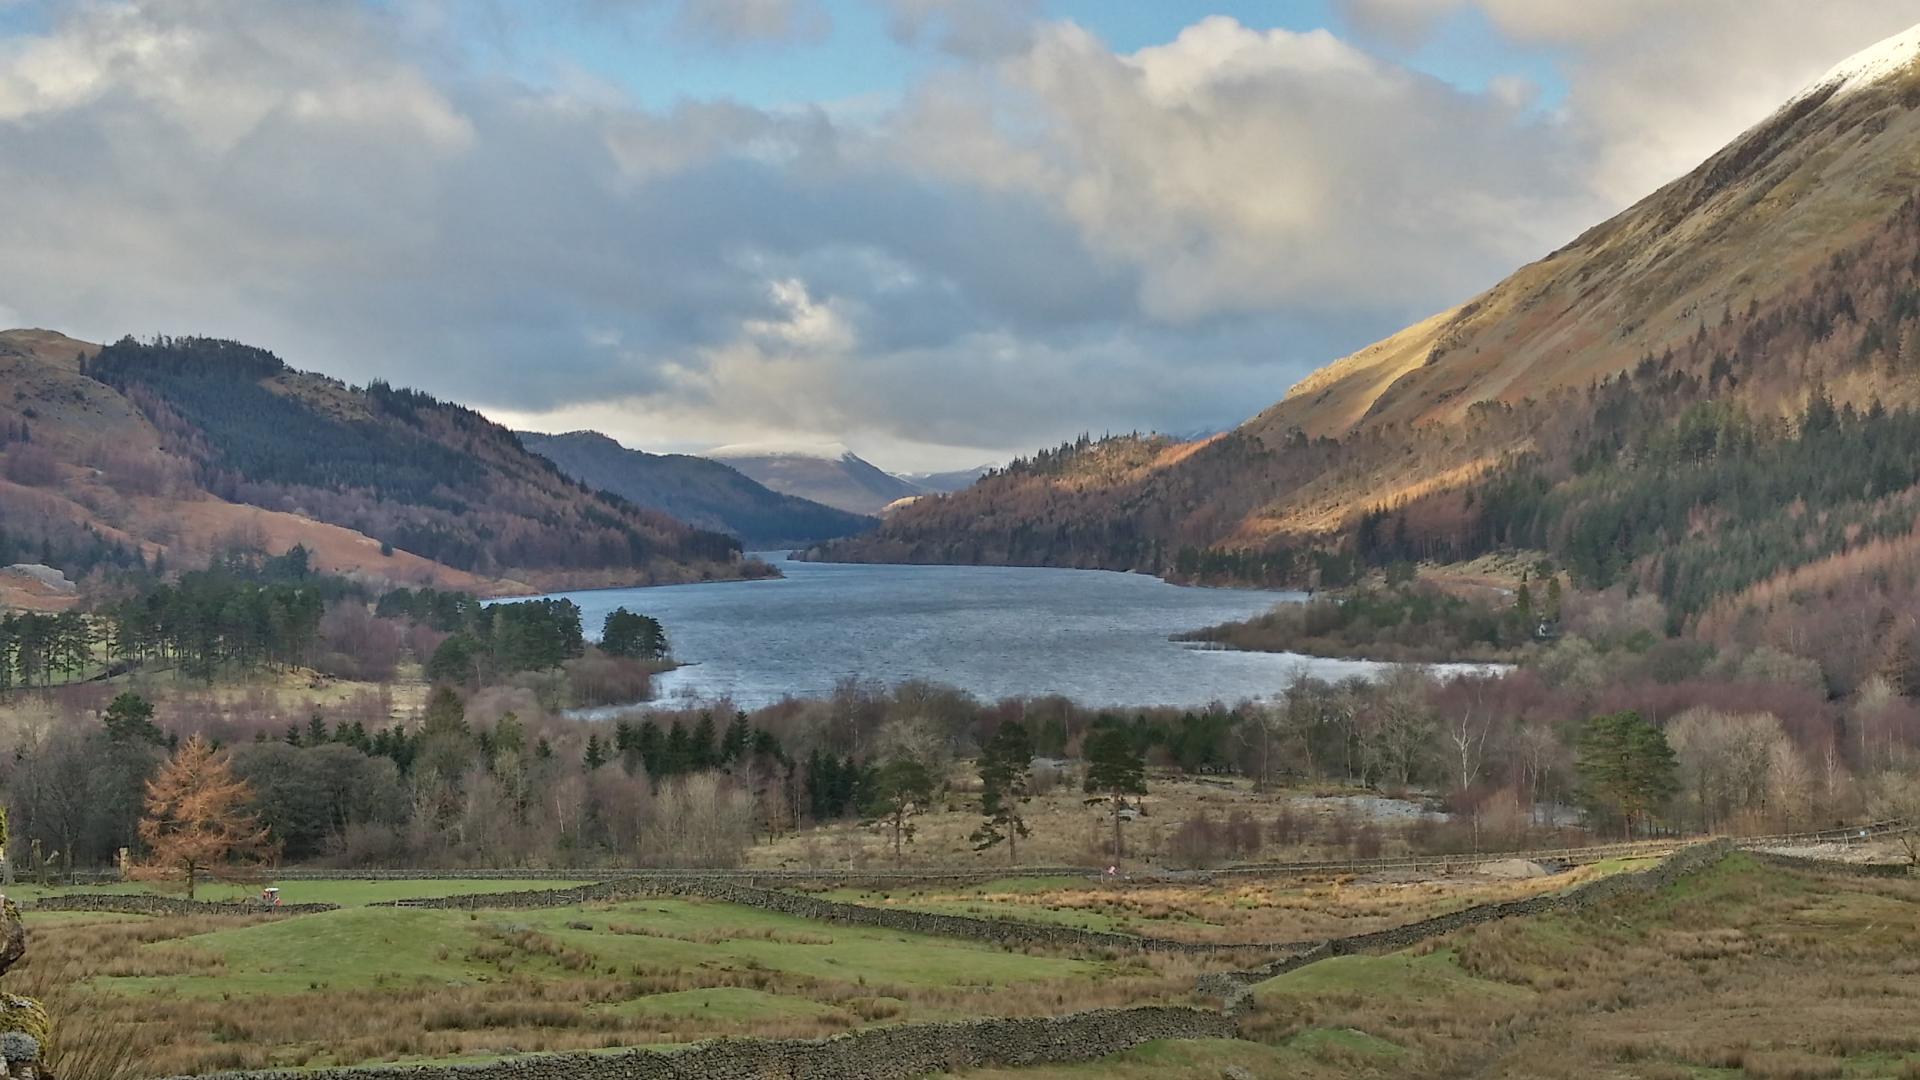 Walking along Thirlmere, with great views of Raven Crag